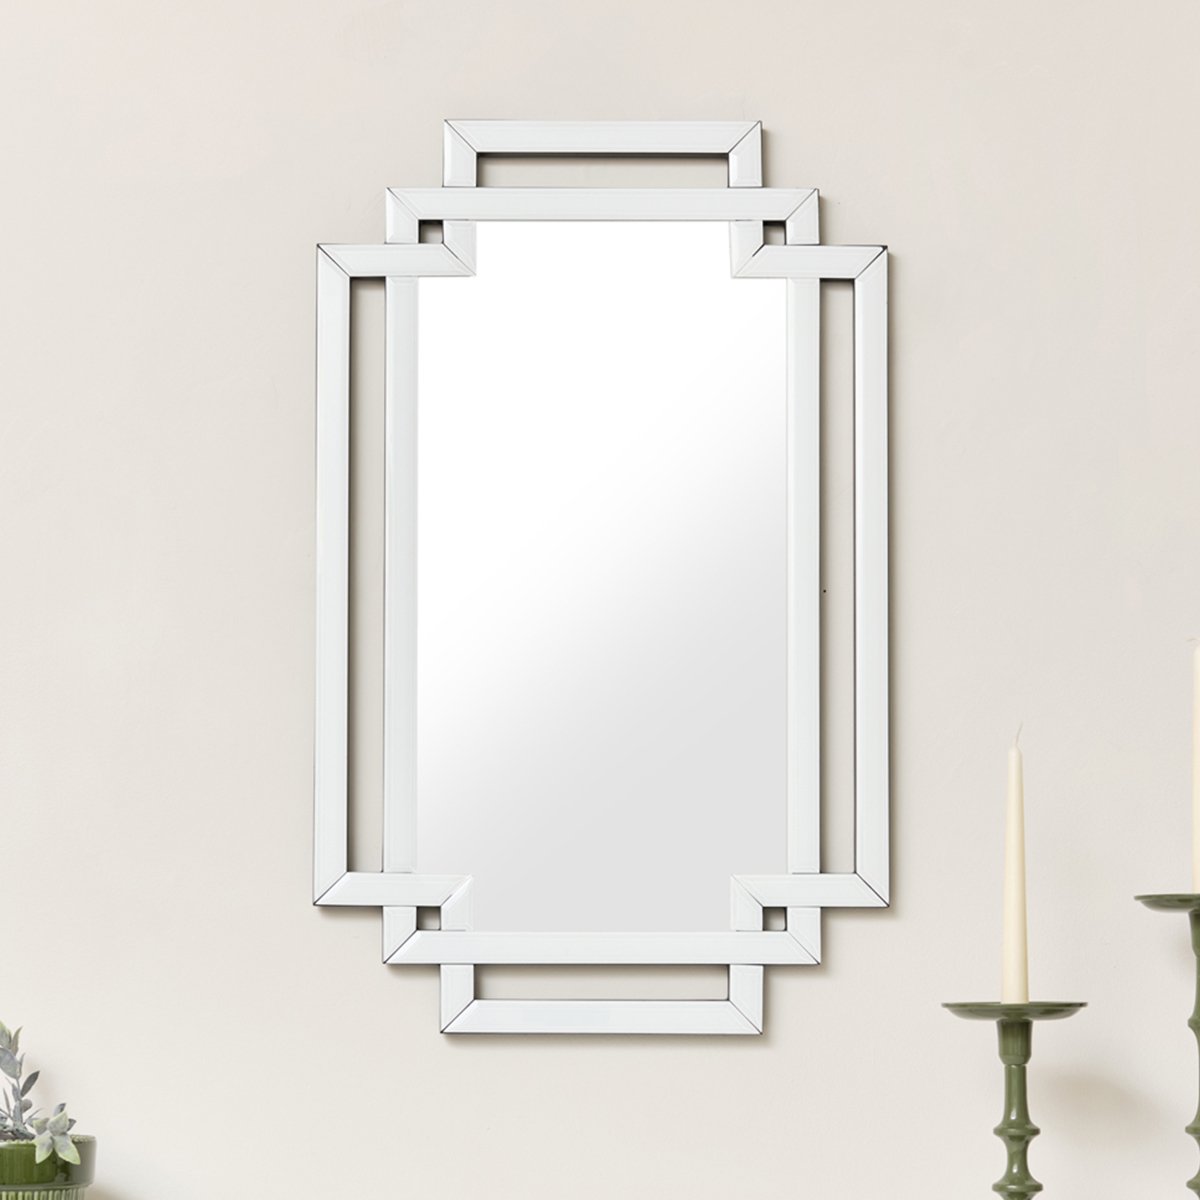 Art Deco White Glass Wall Mirror with Mirrored Accents - 80cm x 50cm